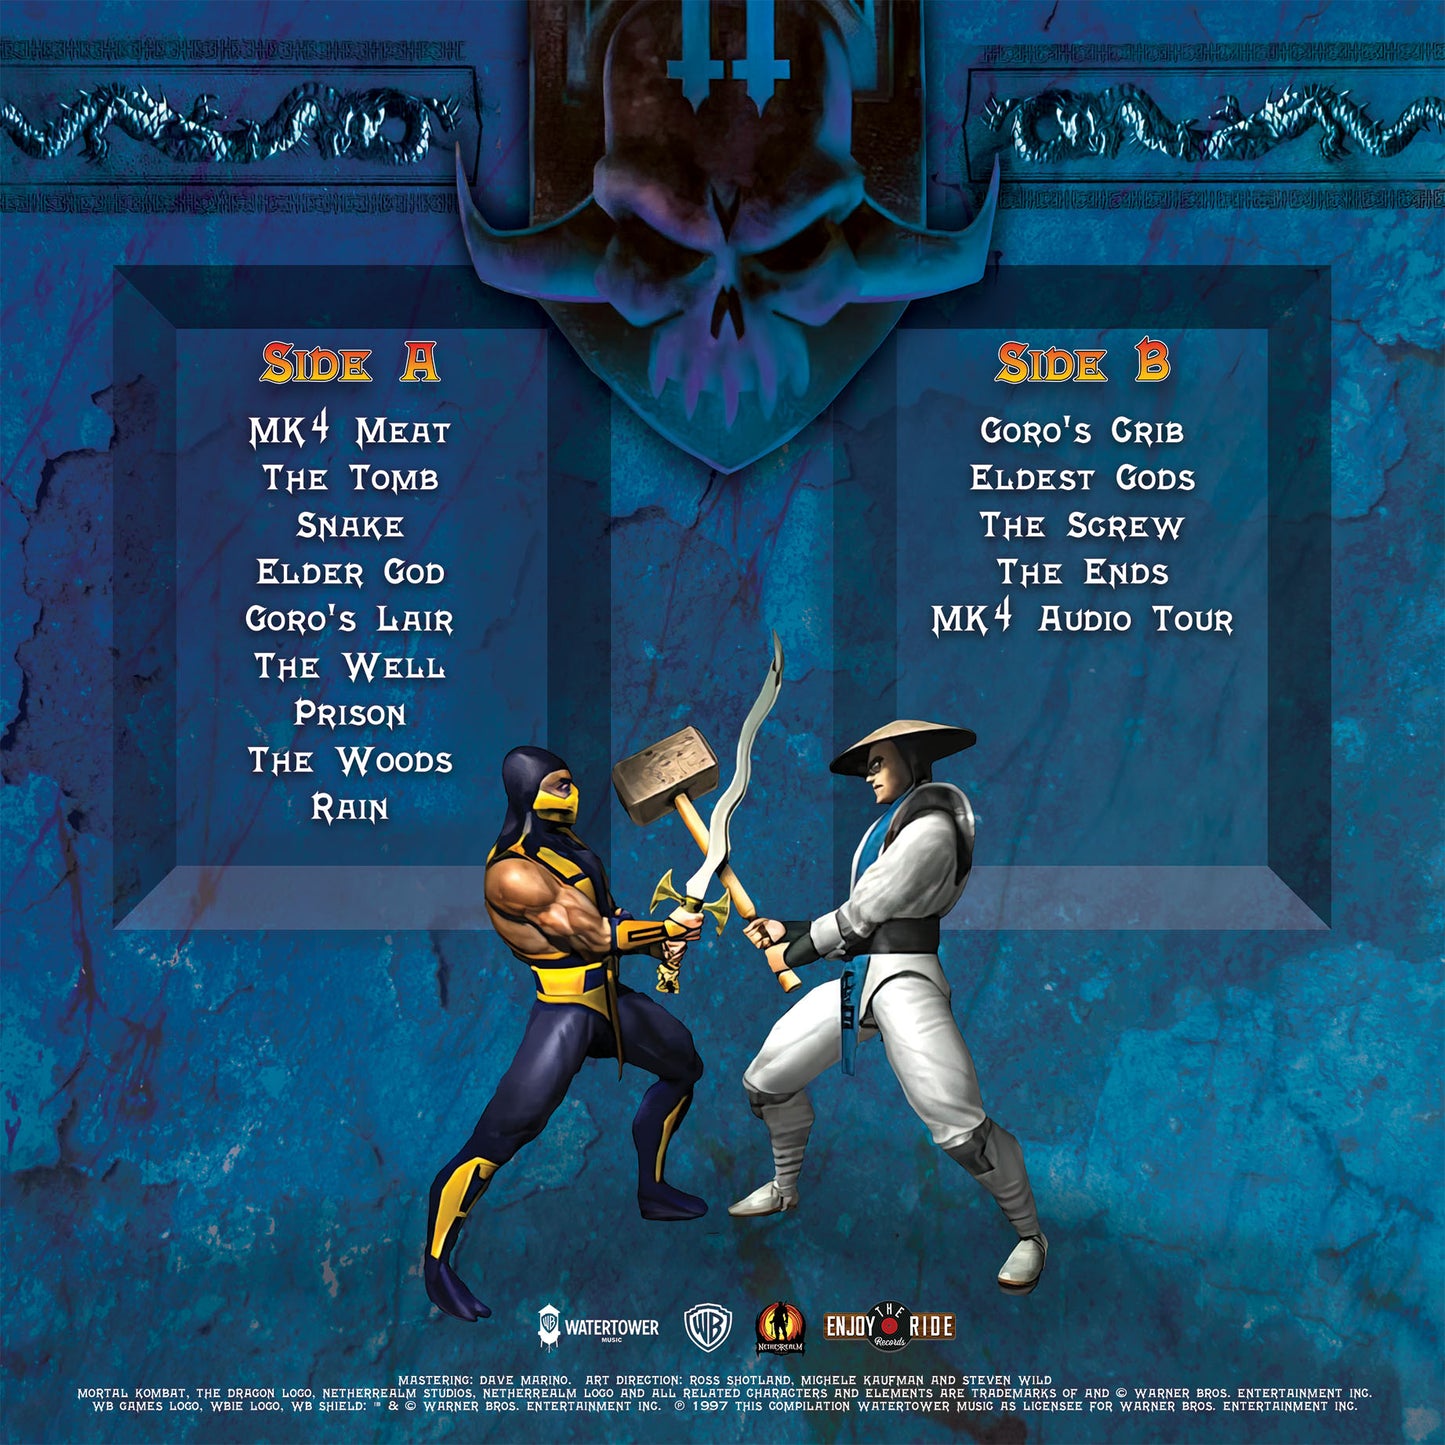 Mortal Kombat 4 - Soundtrack From The Arcade Game - Dan Forden | Helix Sounds